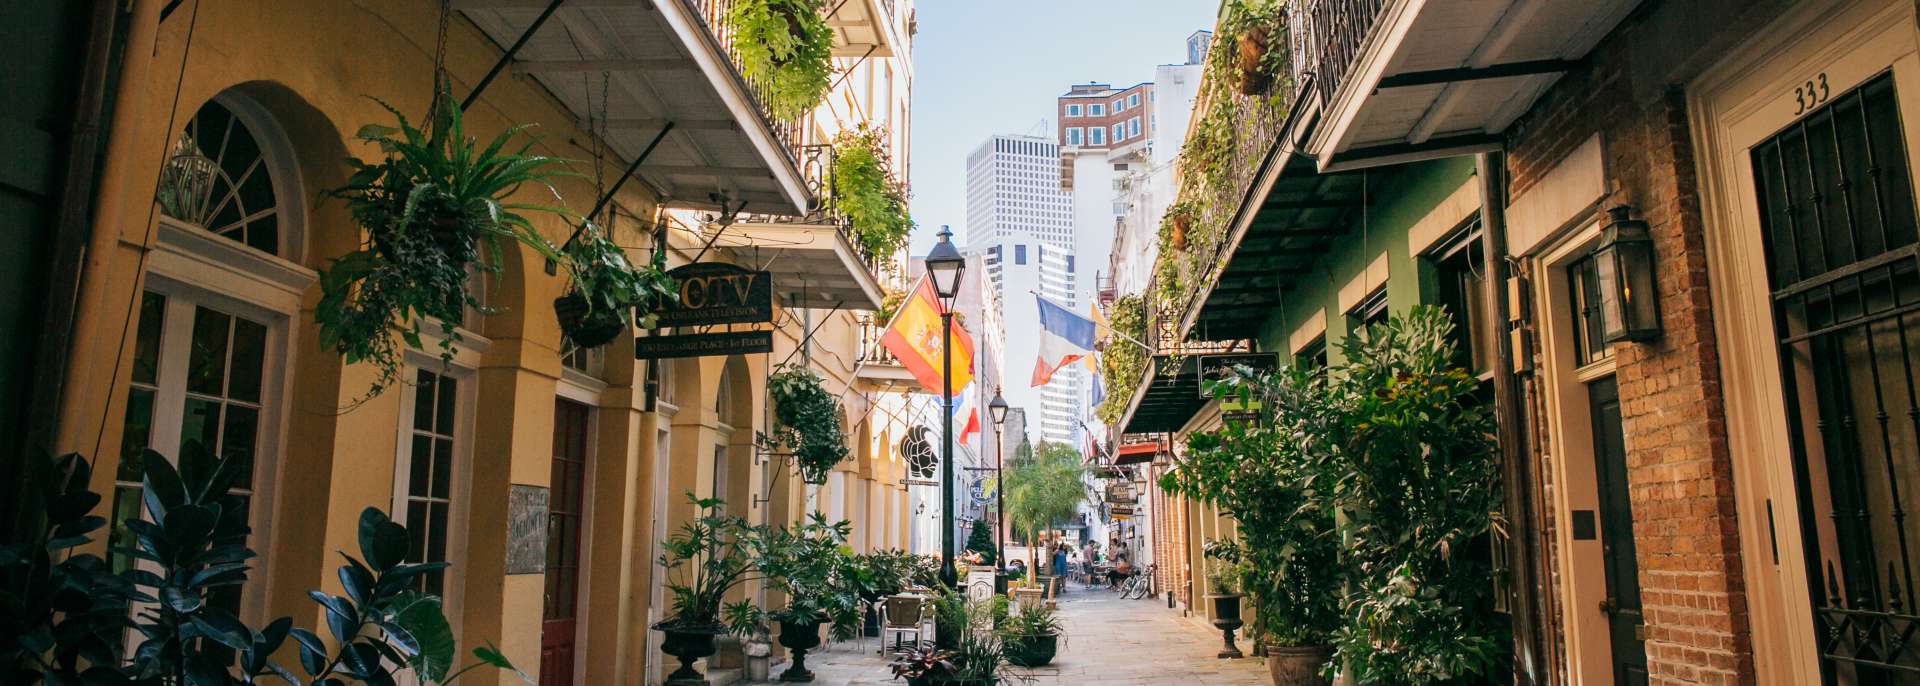 New Orleans, Louisiana: What To Do In A Weekend - Oh The Places